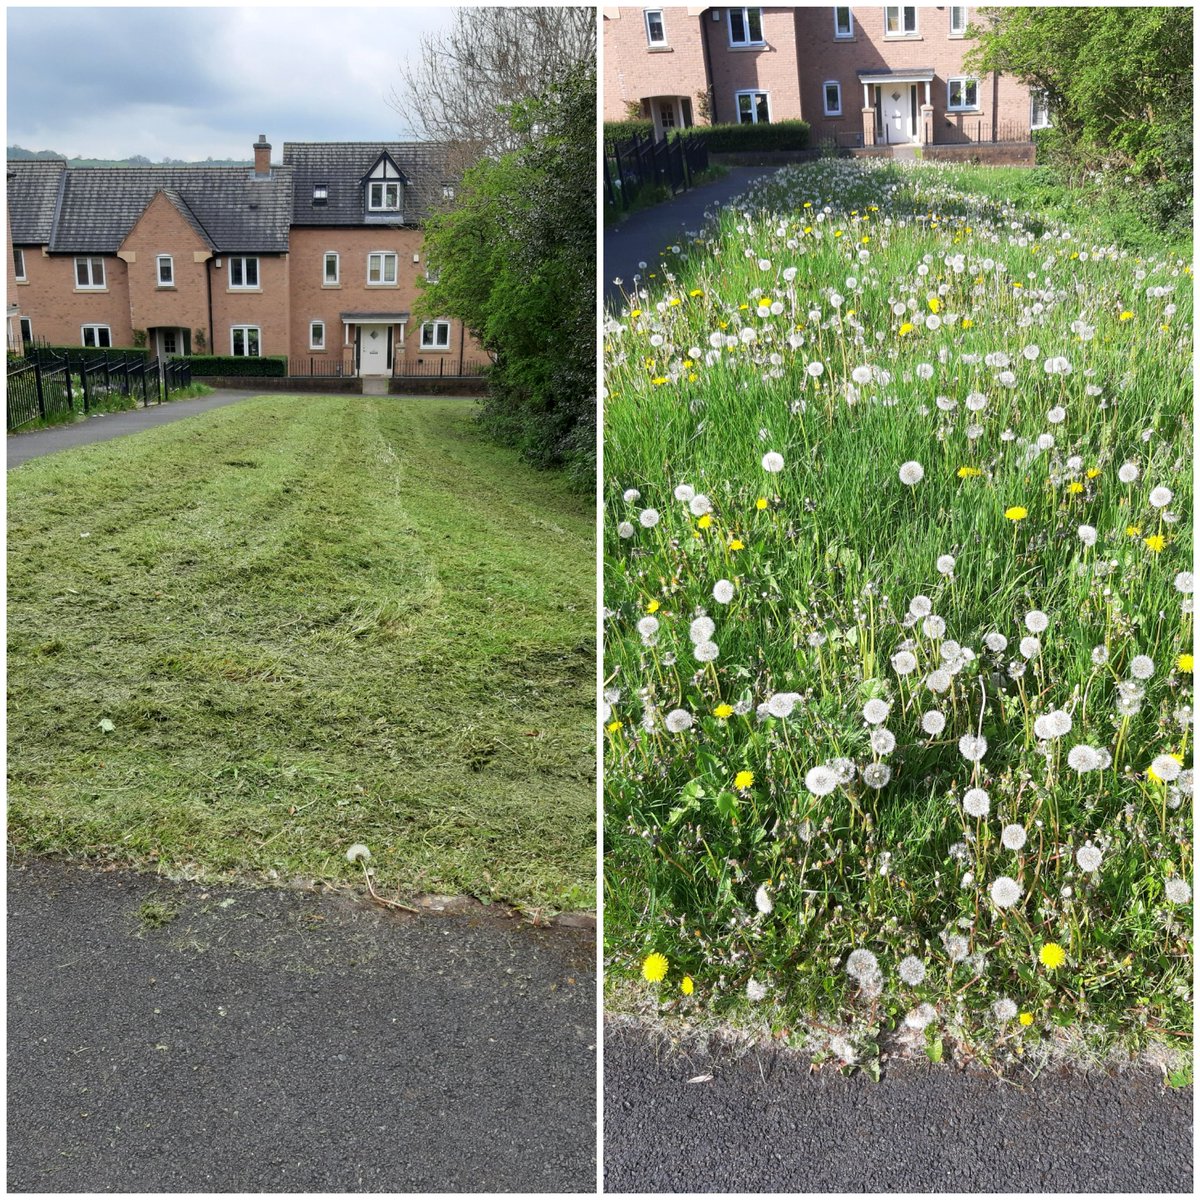 Dandelions aren't harmful to humans Do they sustain insects? How many insects/v'brates were killed by mowing? Would council tax payers like to pay less? Would you like to reduce emissions? Would you like to sequester carbon? @derbyshiredales doesn't seem to care about the above.